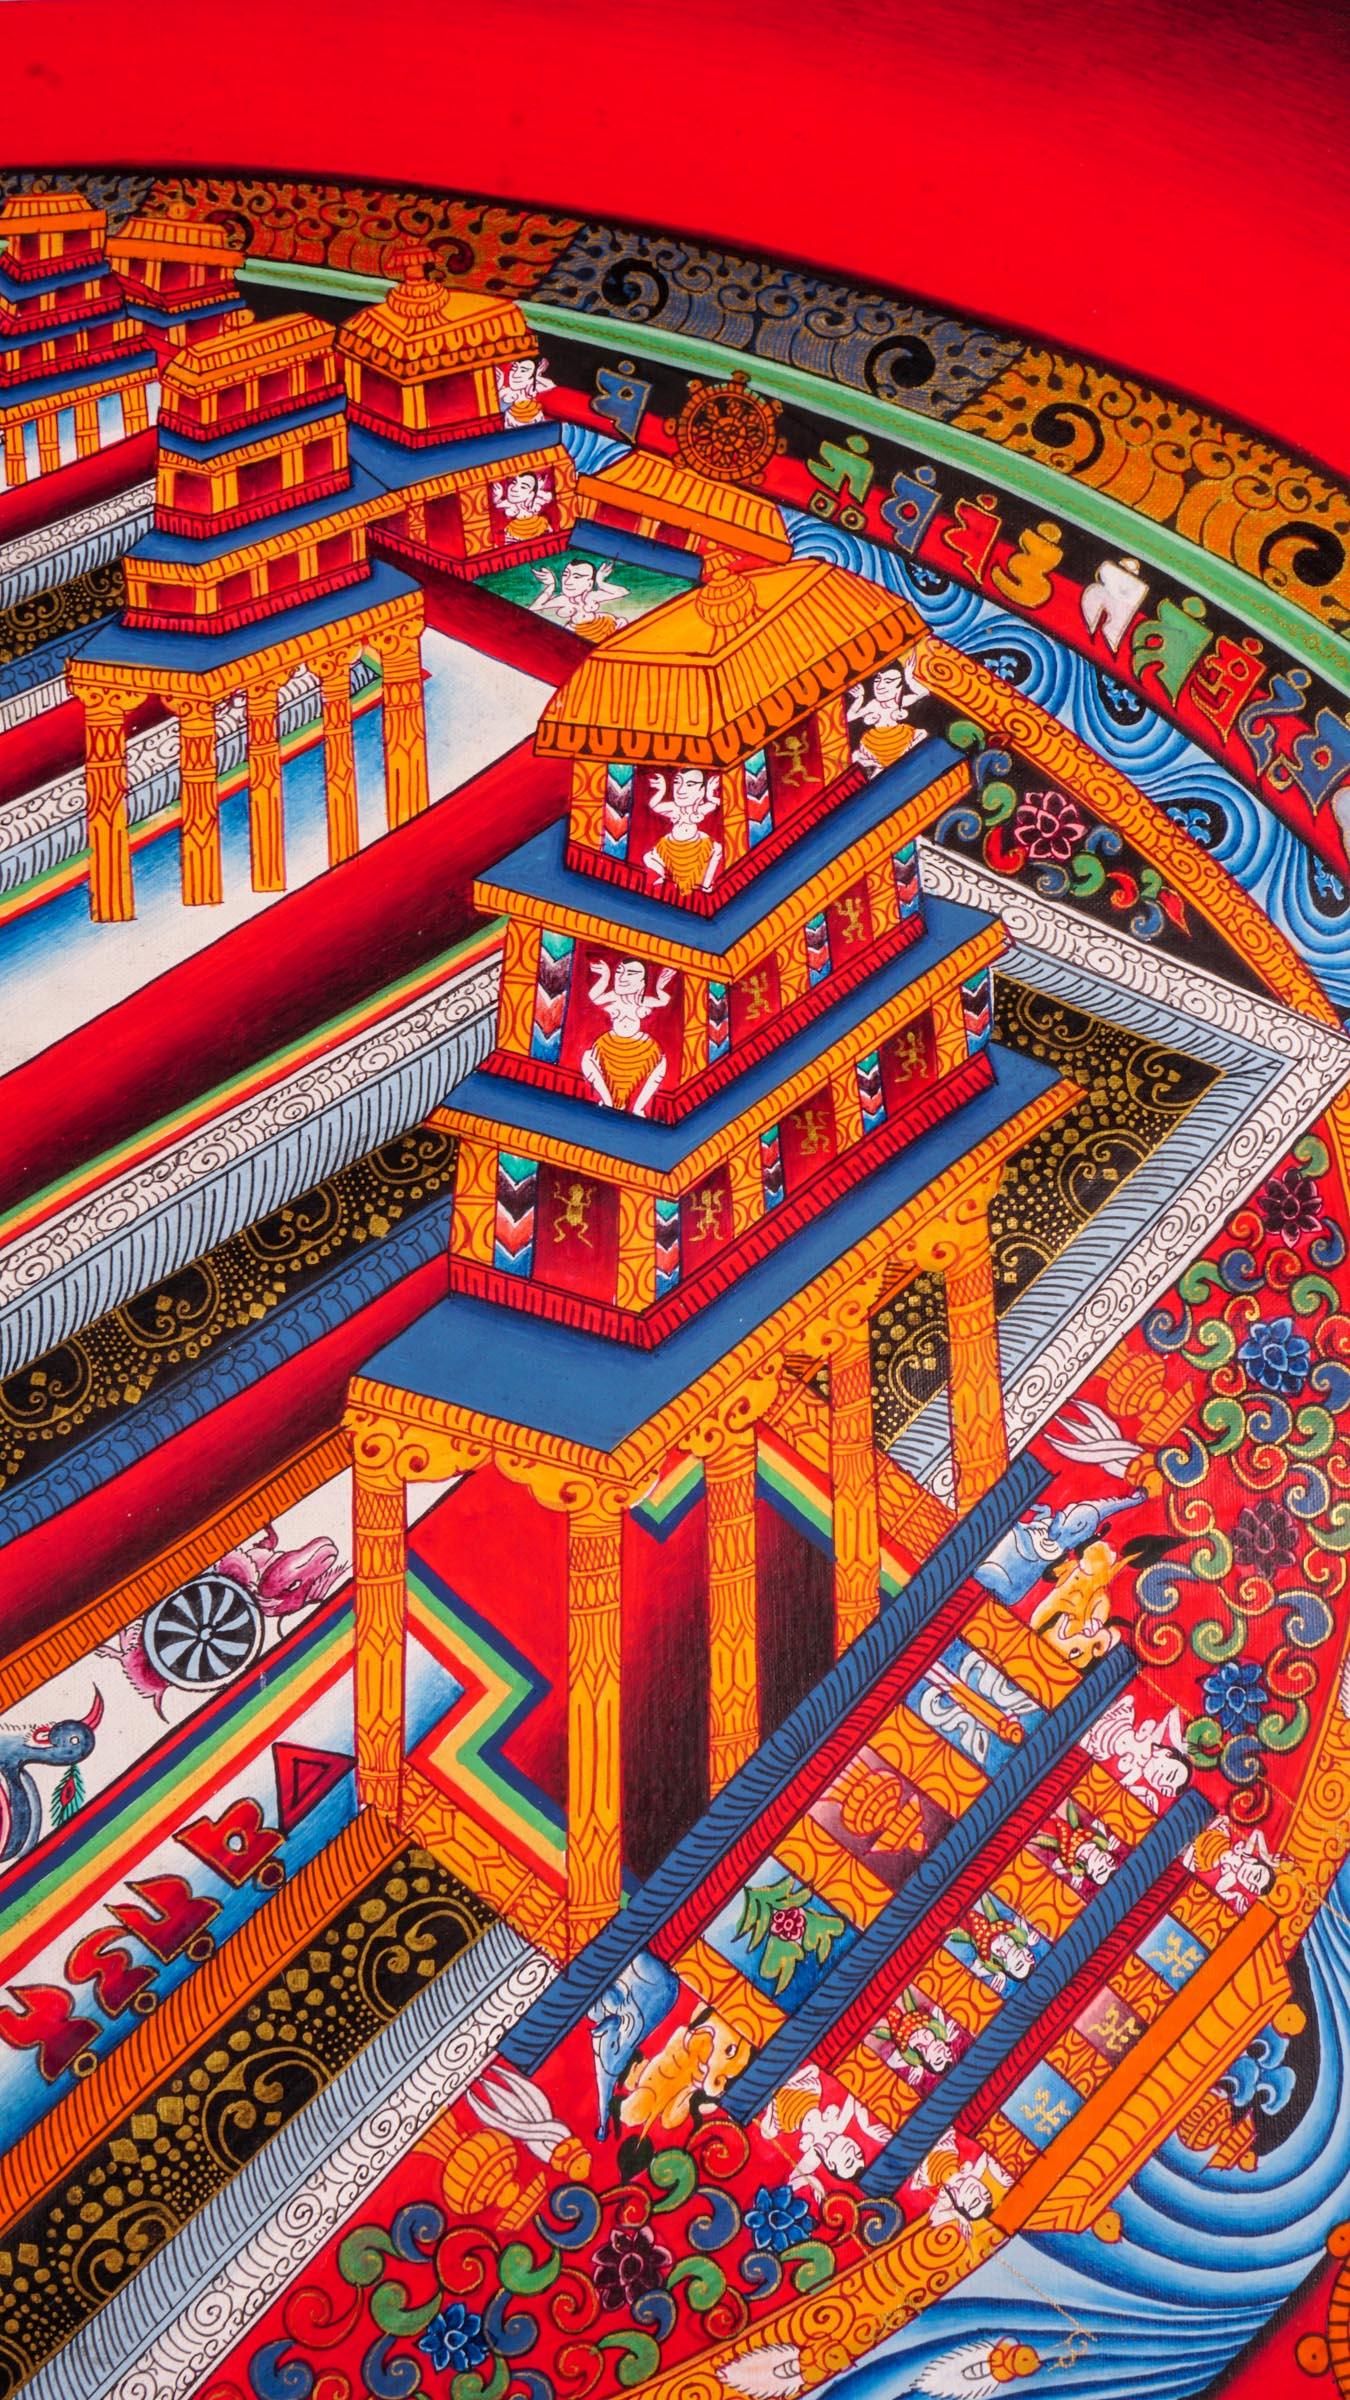 Kalchakra Mandala Thangka Painting on canvas with 3 D to show each dimension of Mandala in details